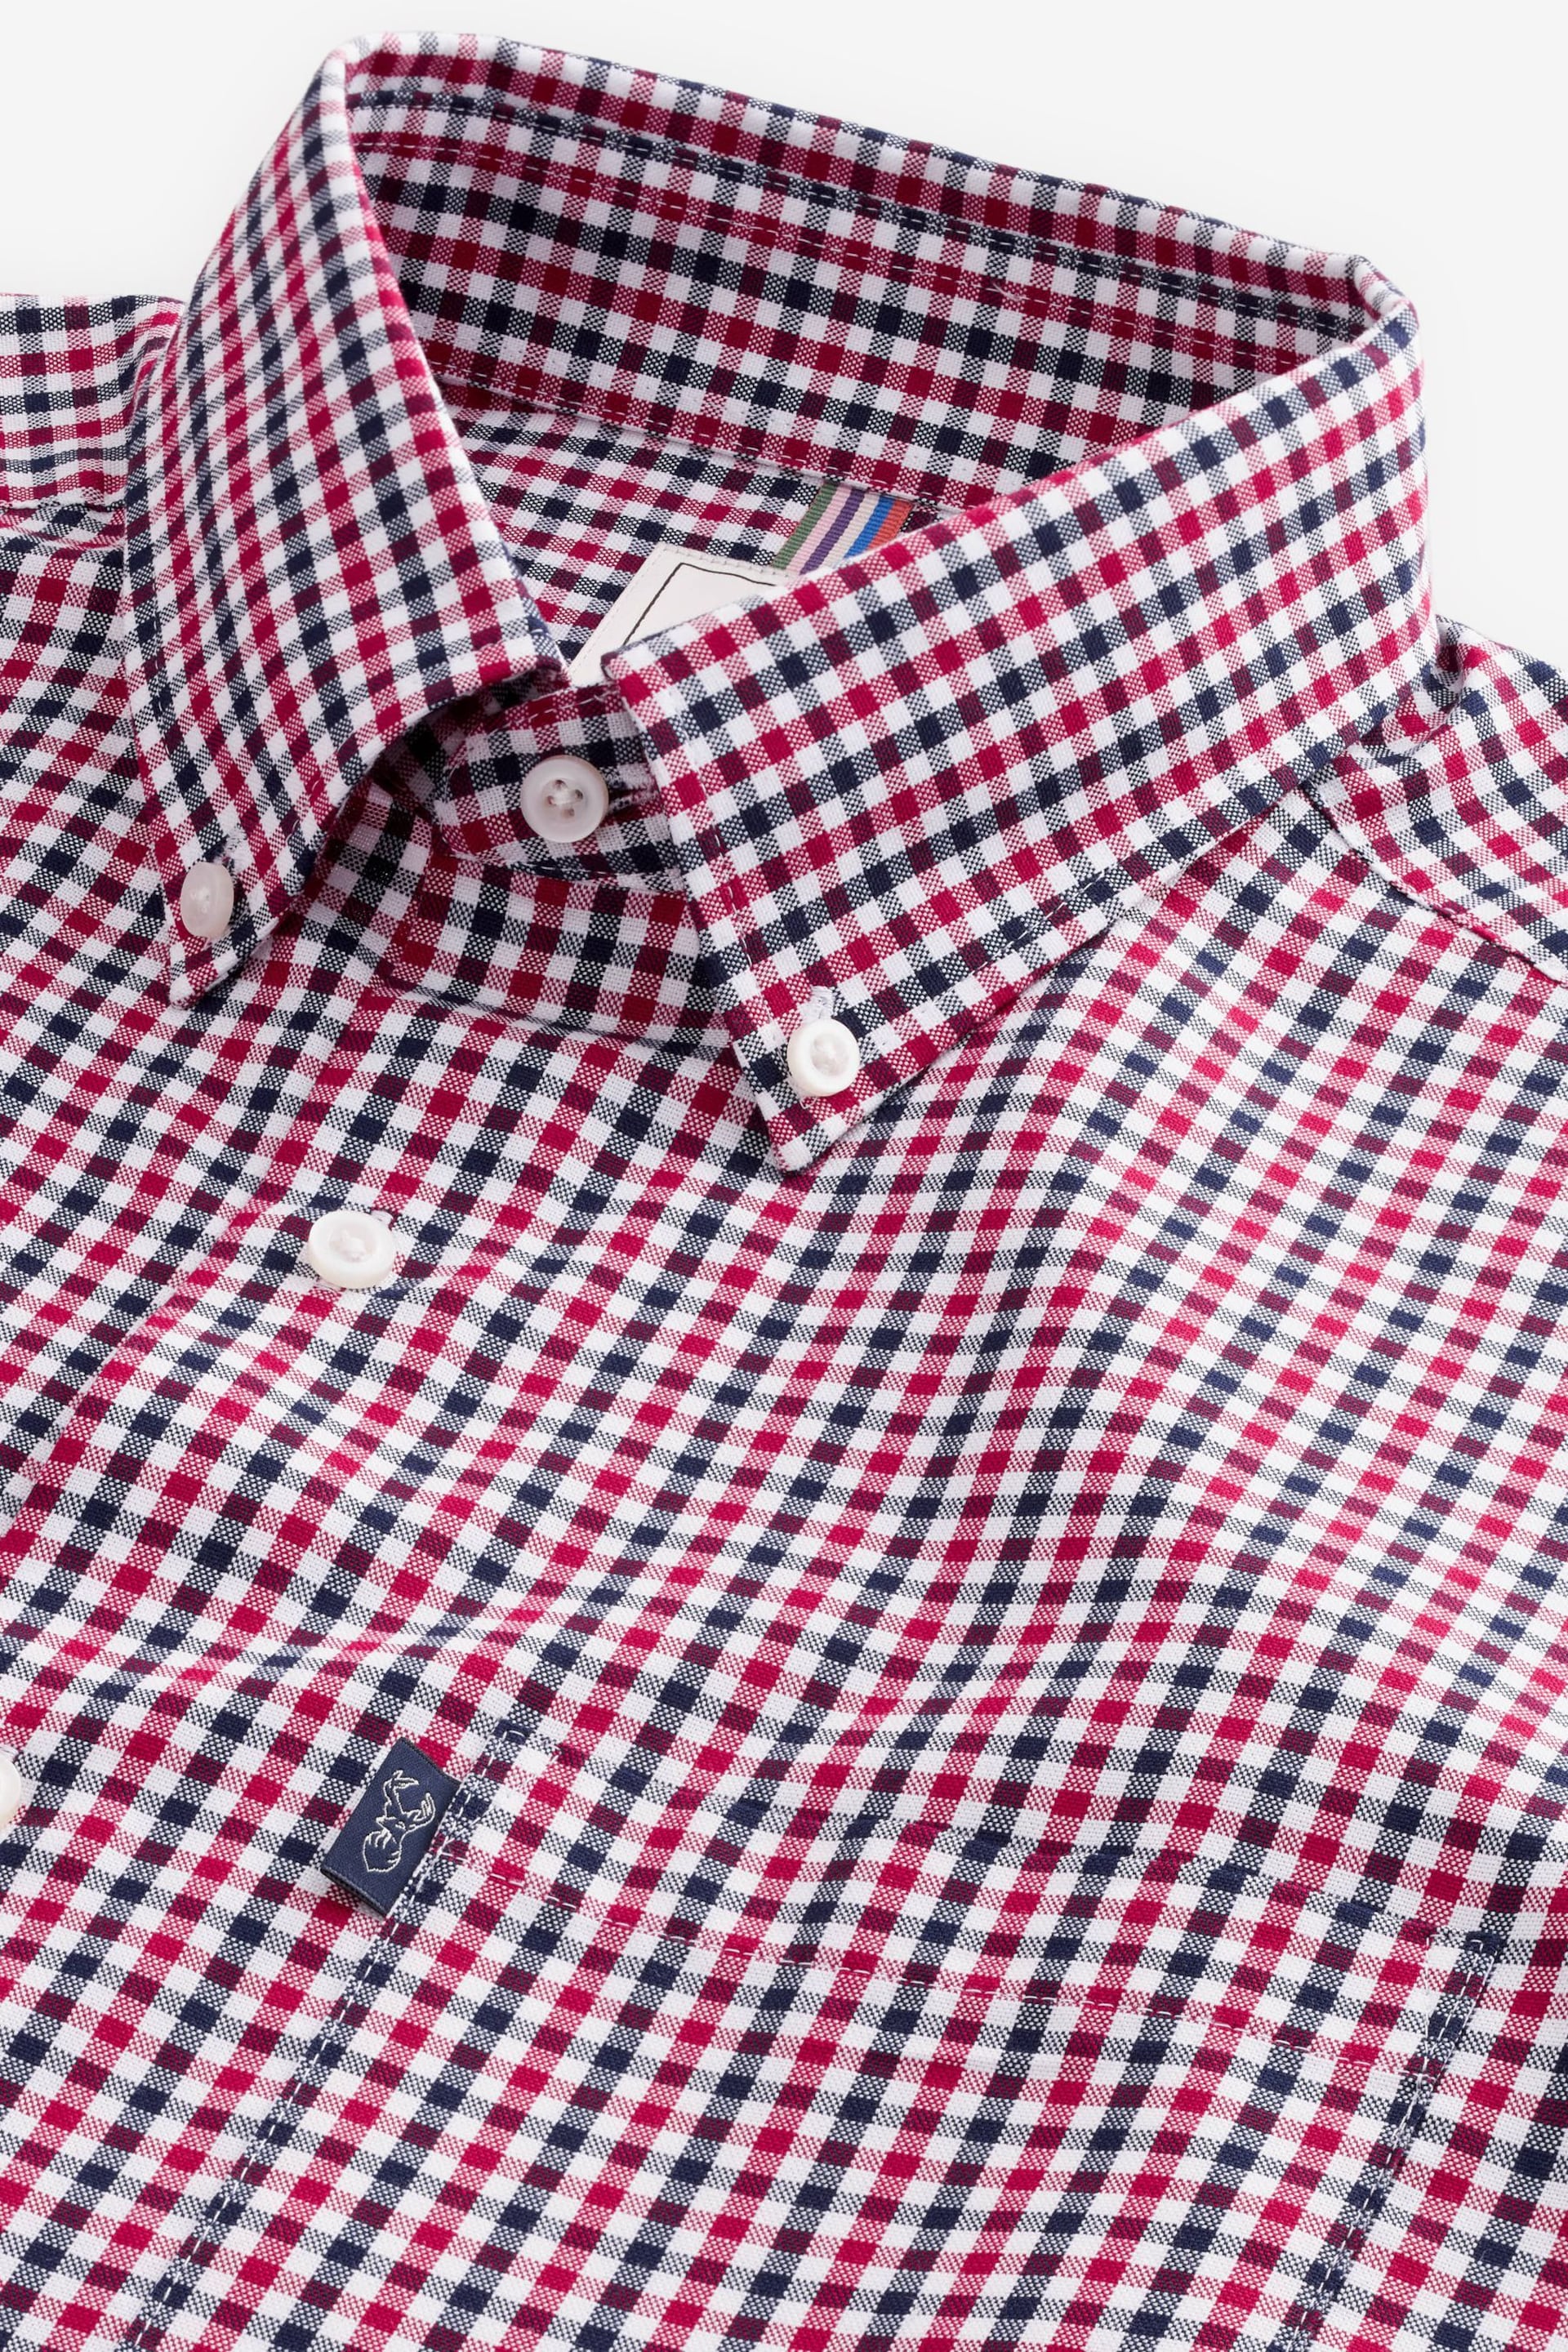 Red Gingham Easy Iron Button Down Oxford Shirt - Image 7 of 8